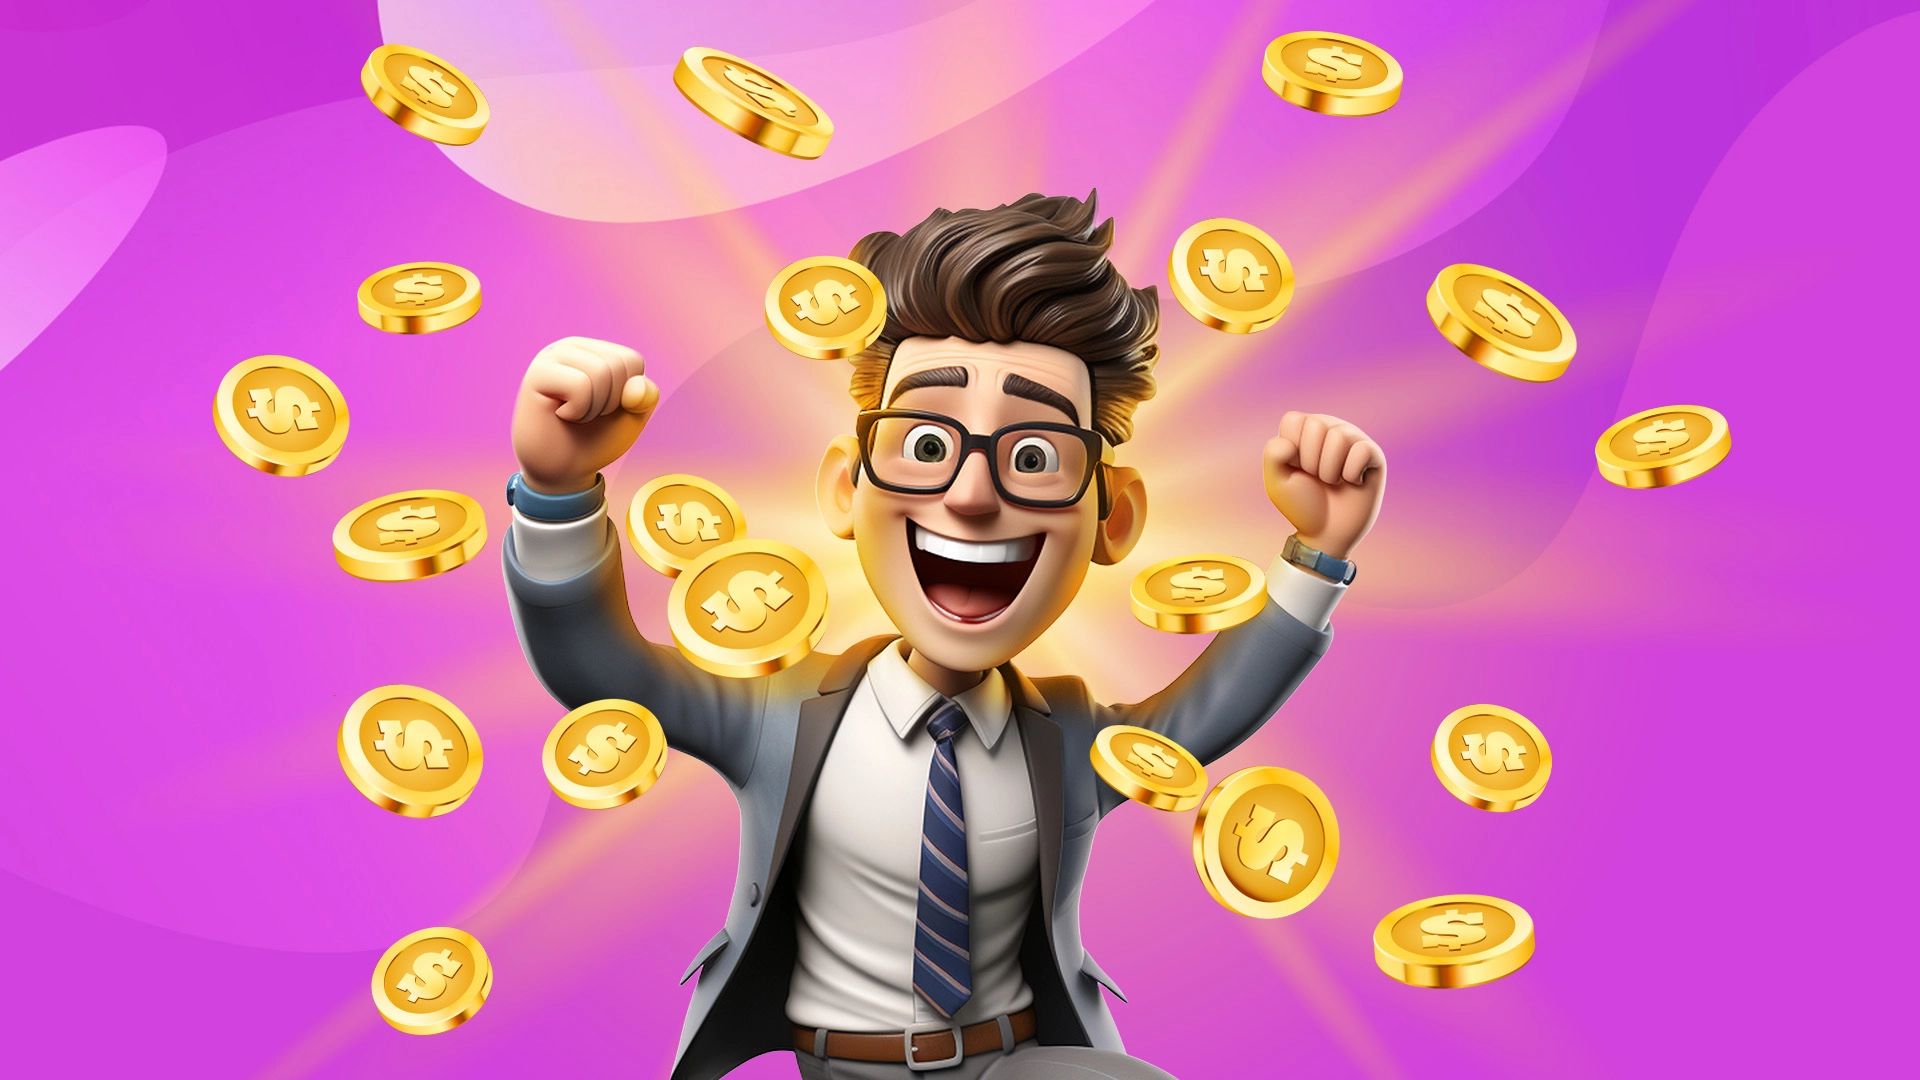 Cartoon man in a suit surrounded by gold coins, set against a purple background.